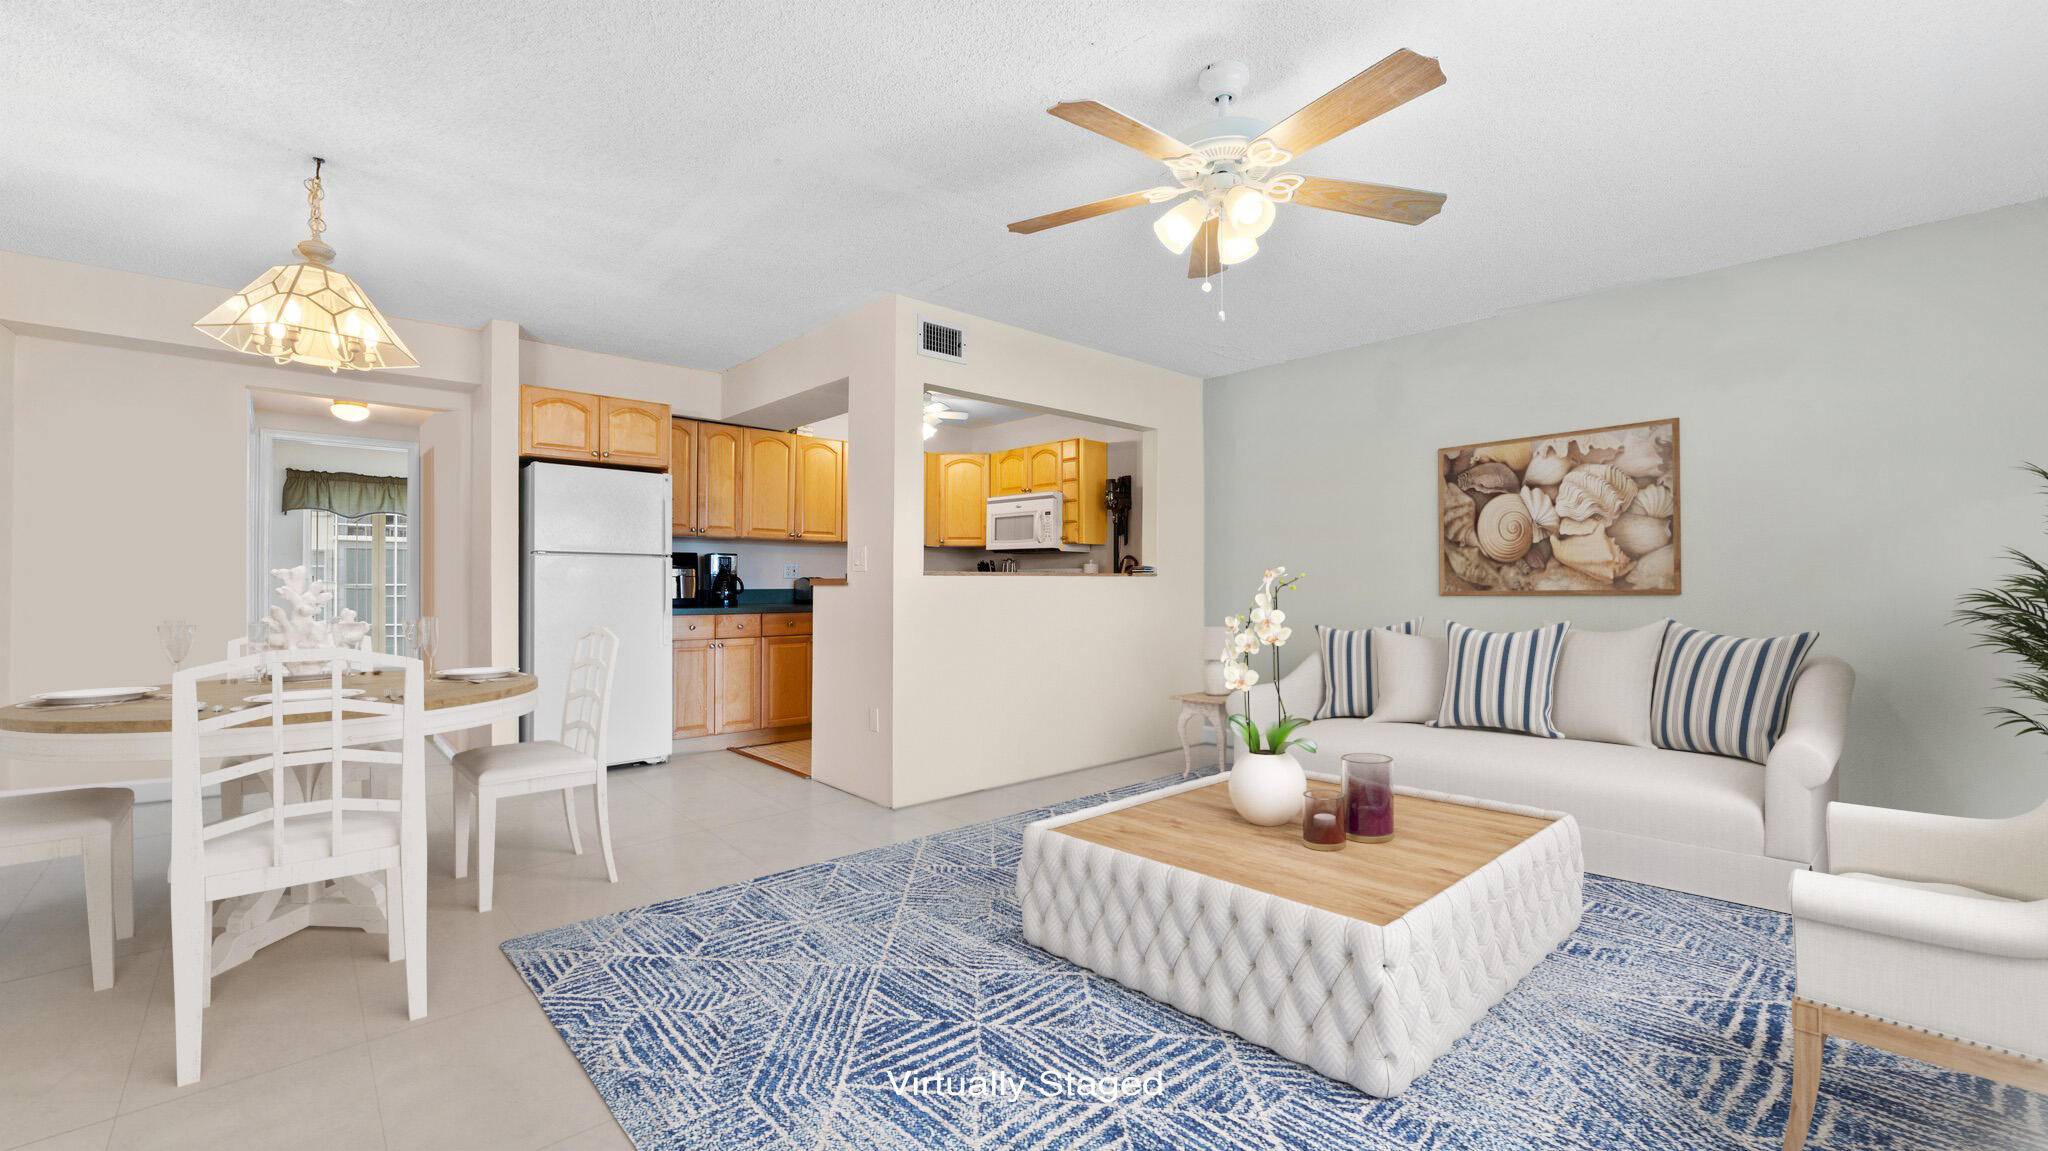 Located right on the Intracoastal with a 1 2 mile boardwalk perfect for biking and boat watching, this spacious condo offers convenience and water views.